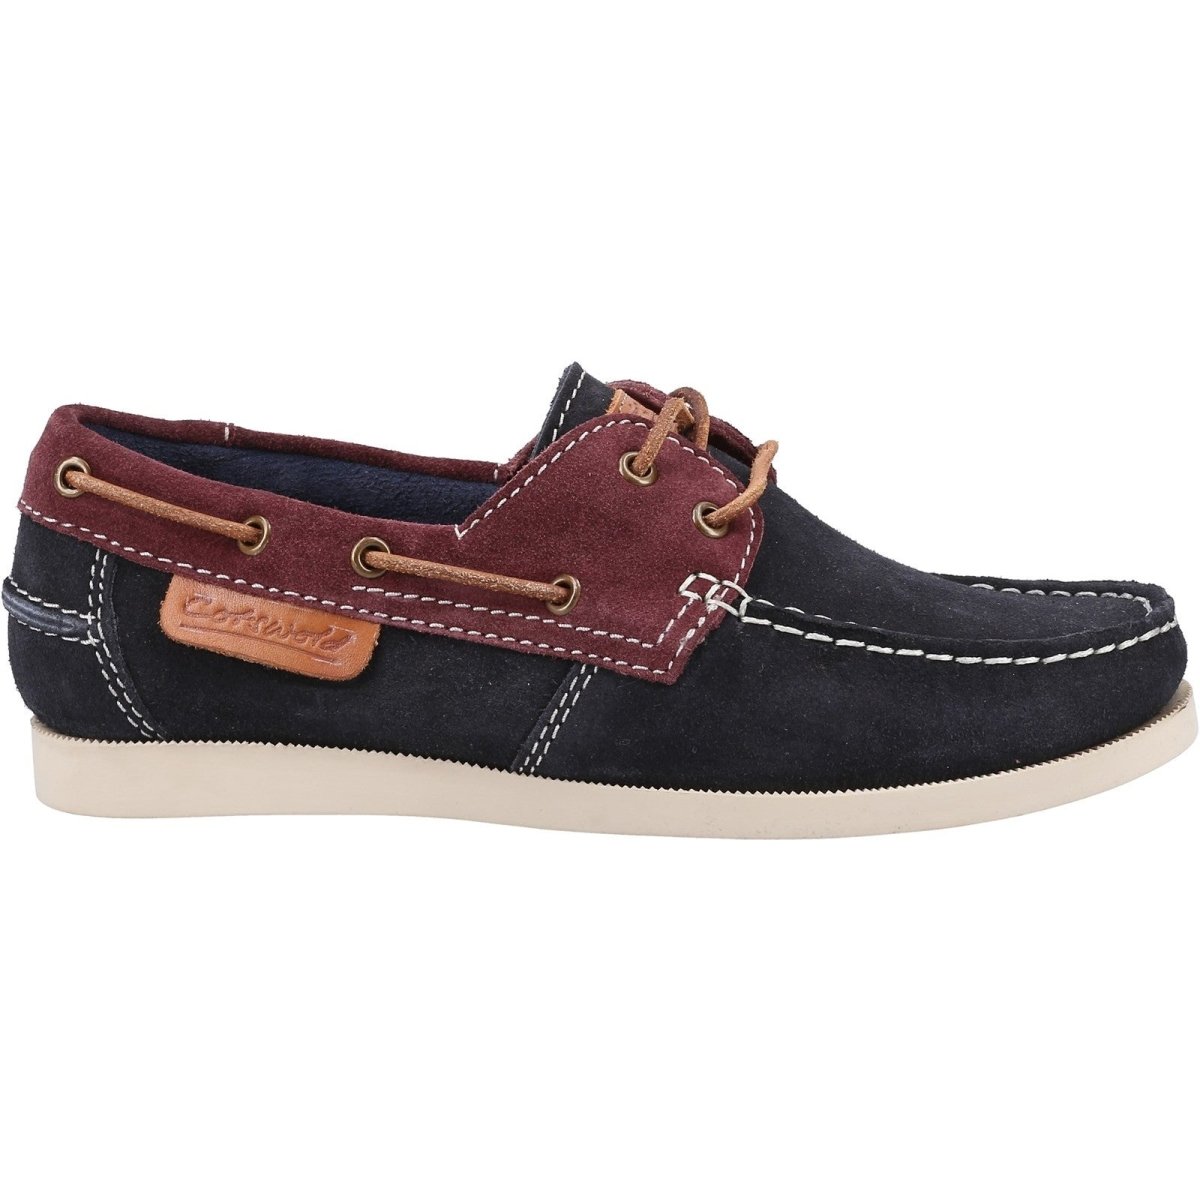 Cotswold Idbury Ladies Suede Moccasin Boat Shoes - Shoe Store Direct